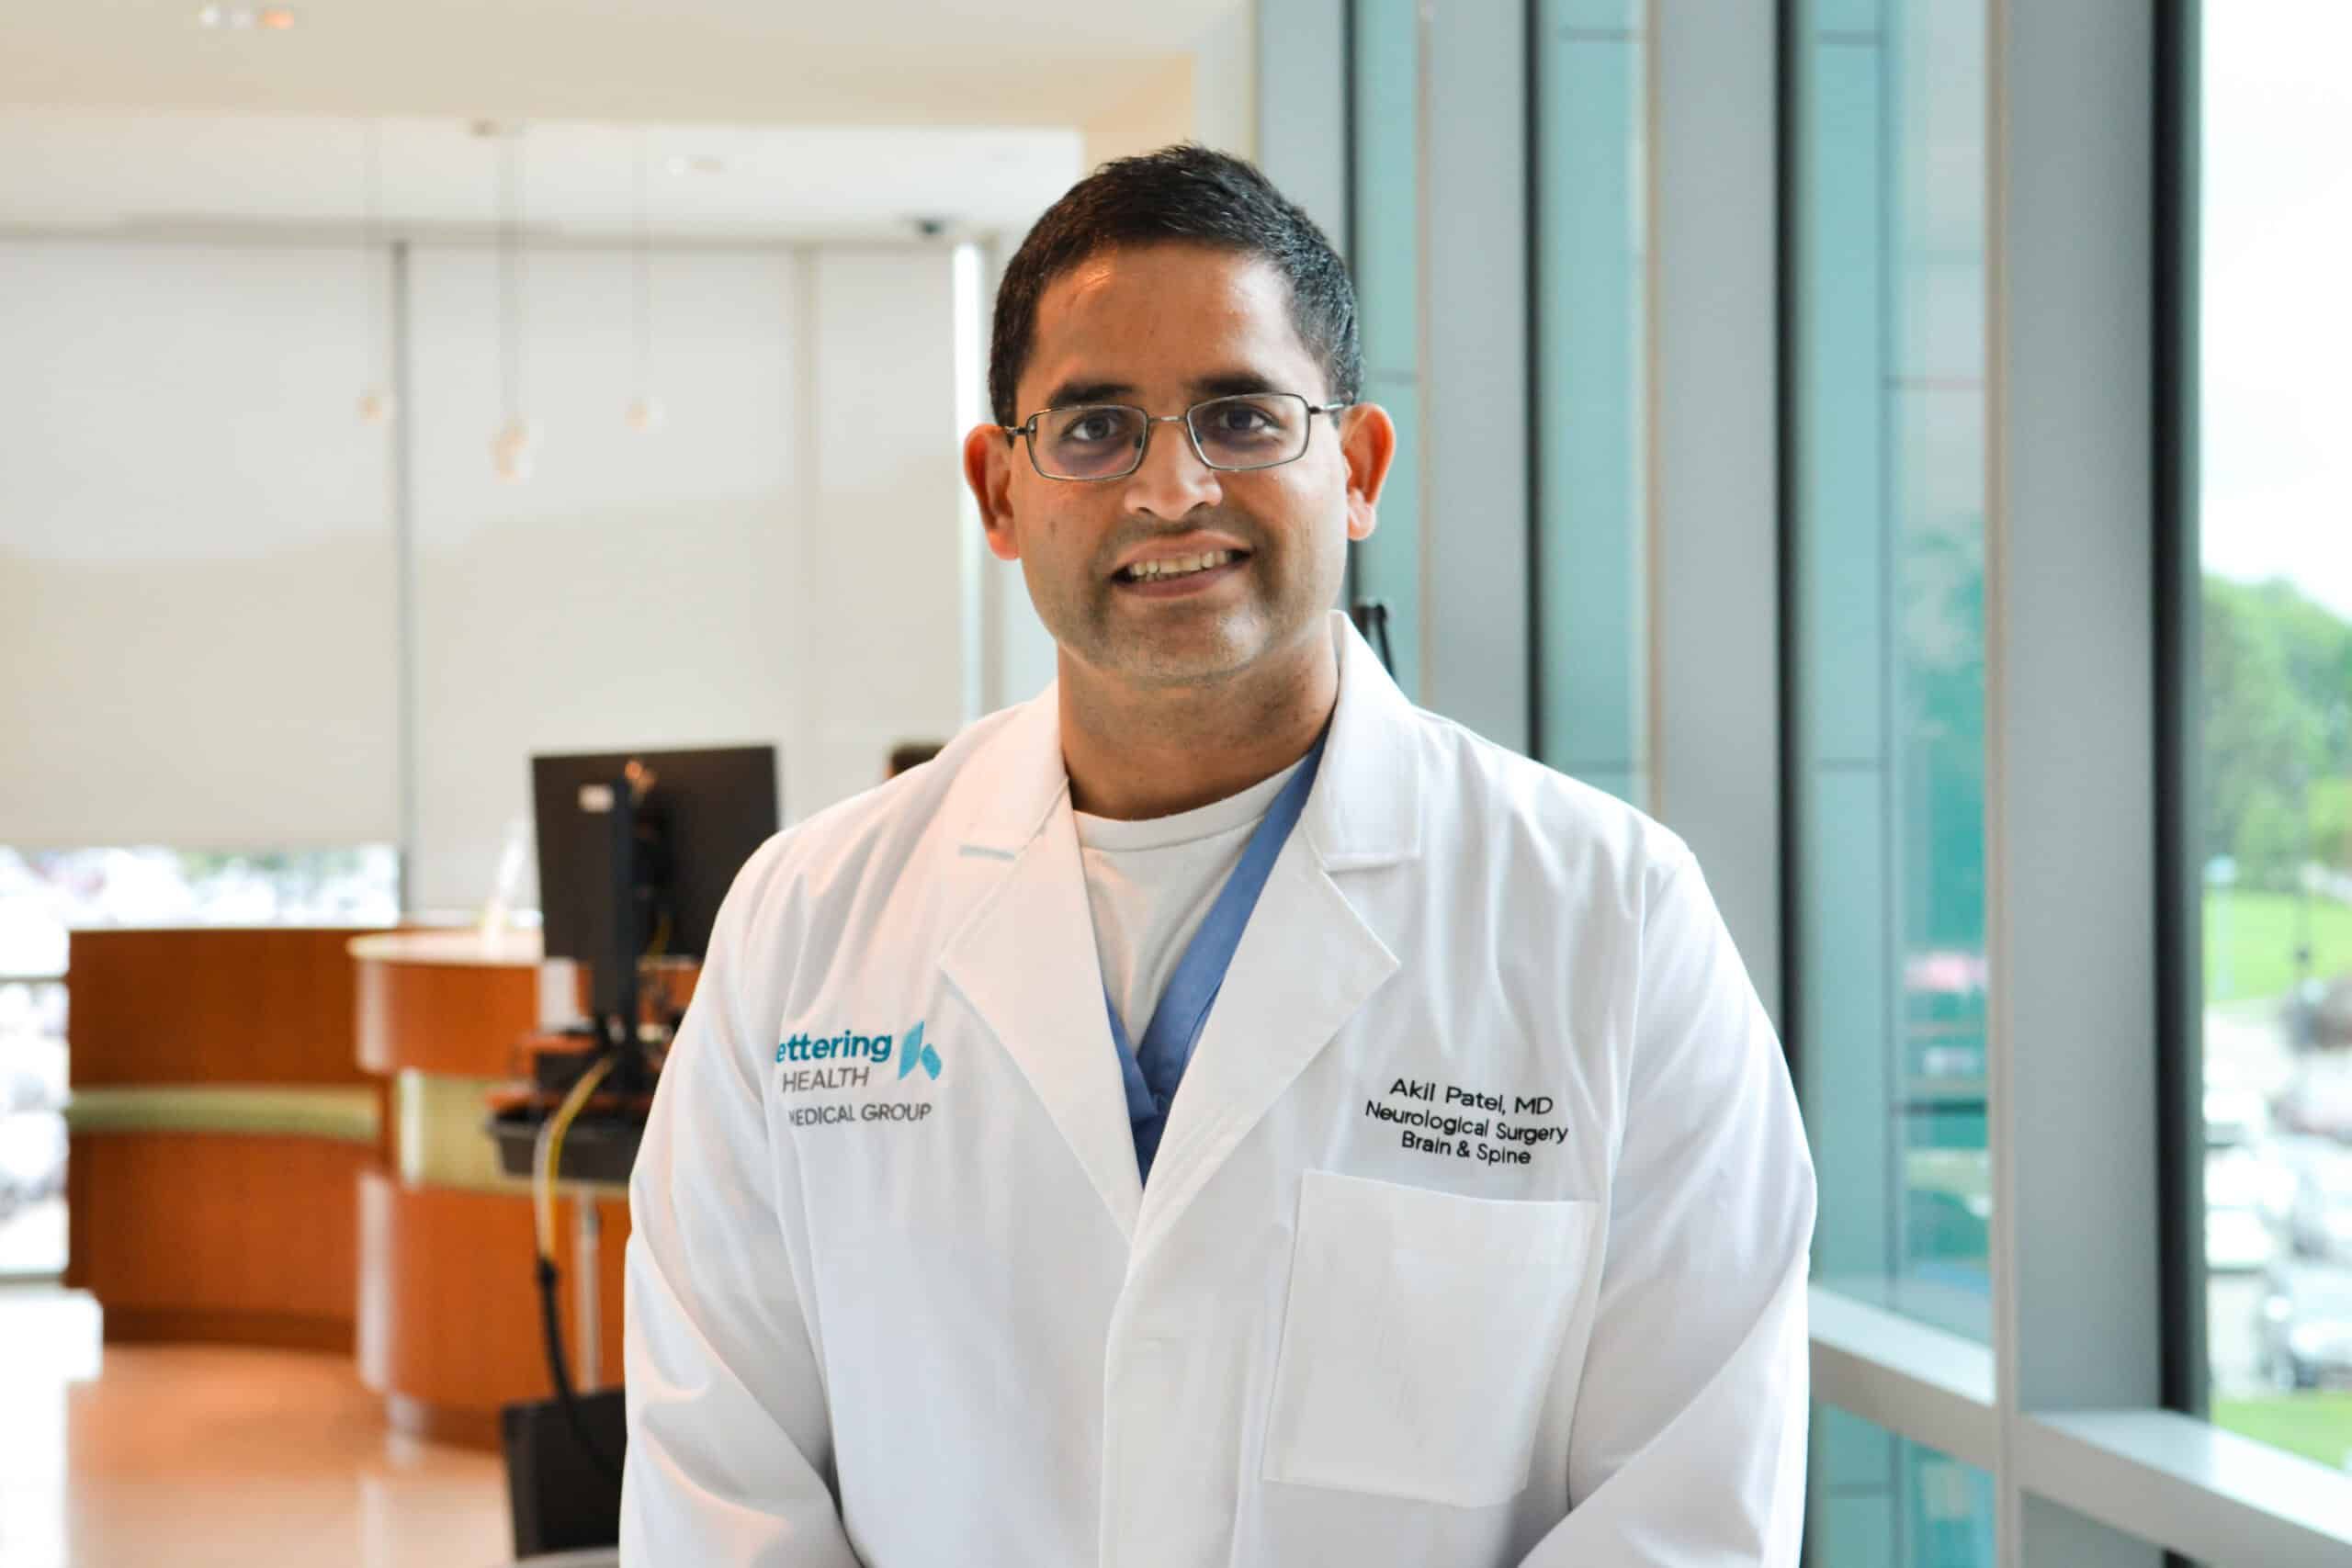 Dr. Akil Patel smiling at the camera in clinical hallway